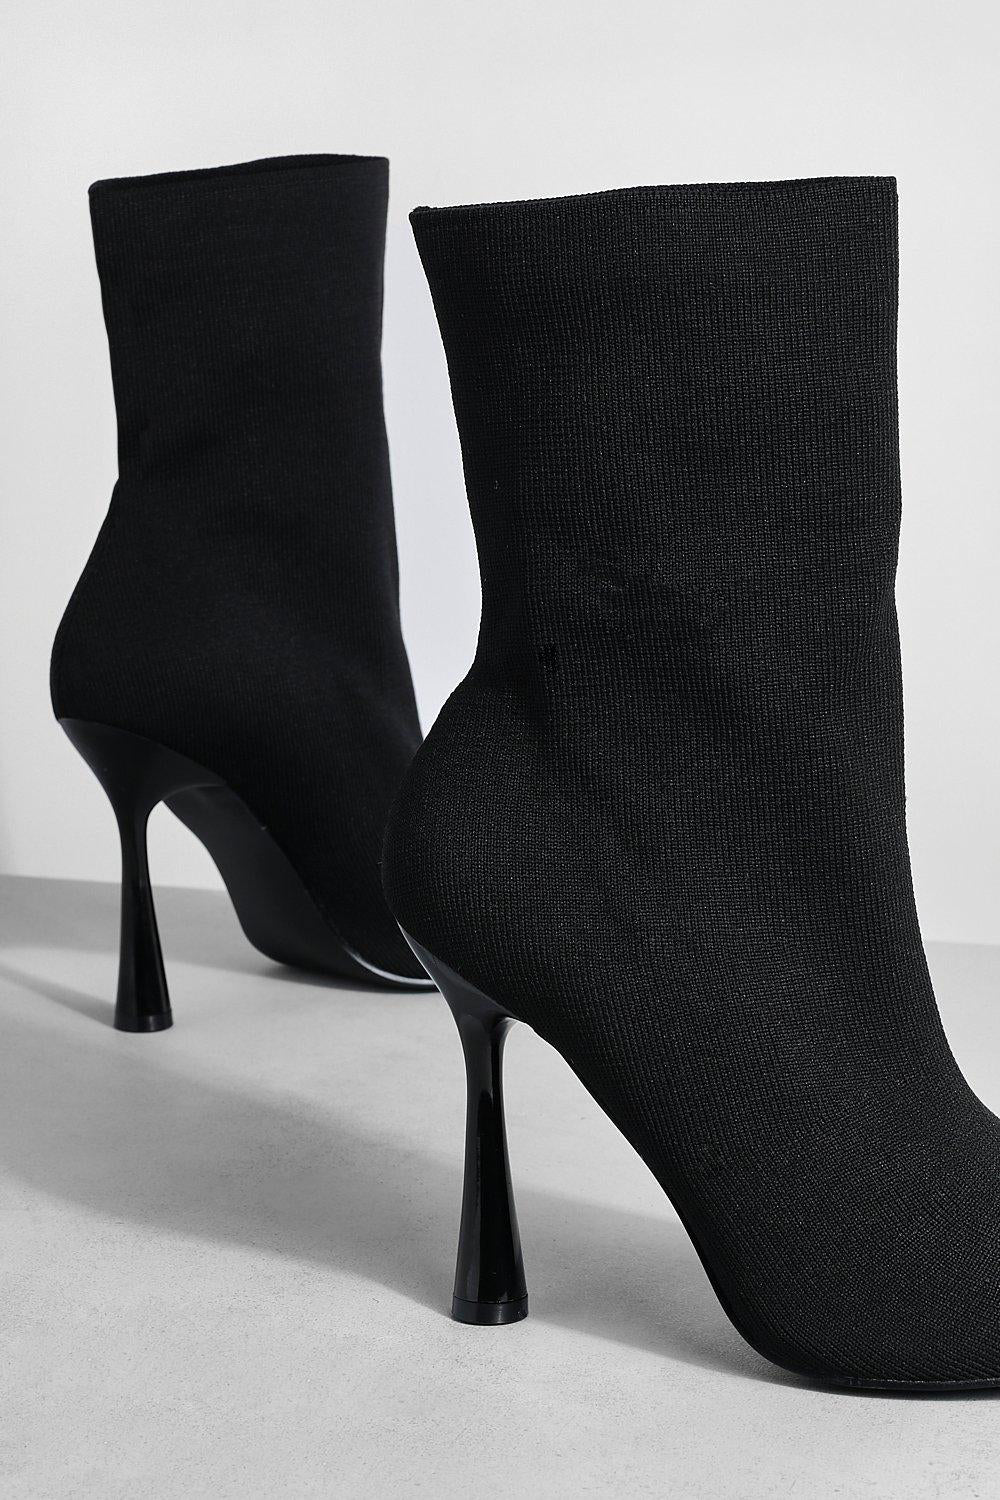 Black Knitted High Heels Mid Calf Sock Boots In Black